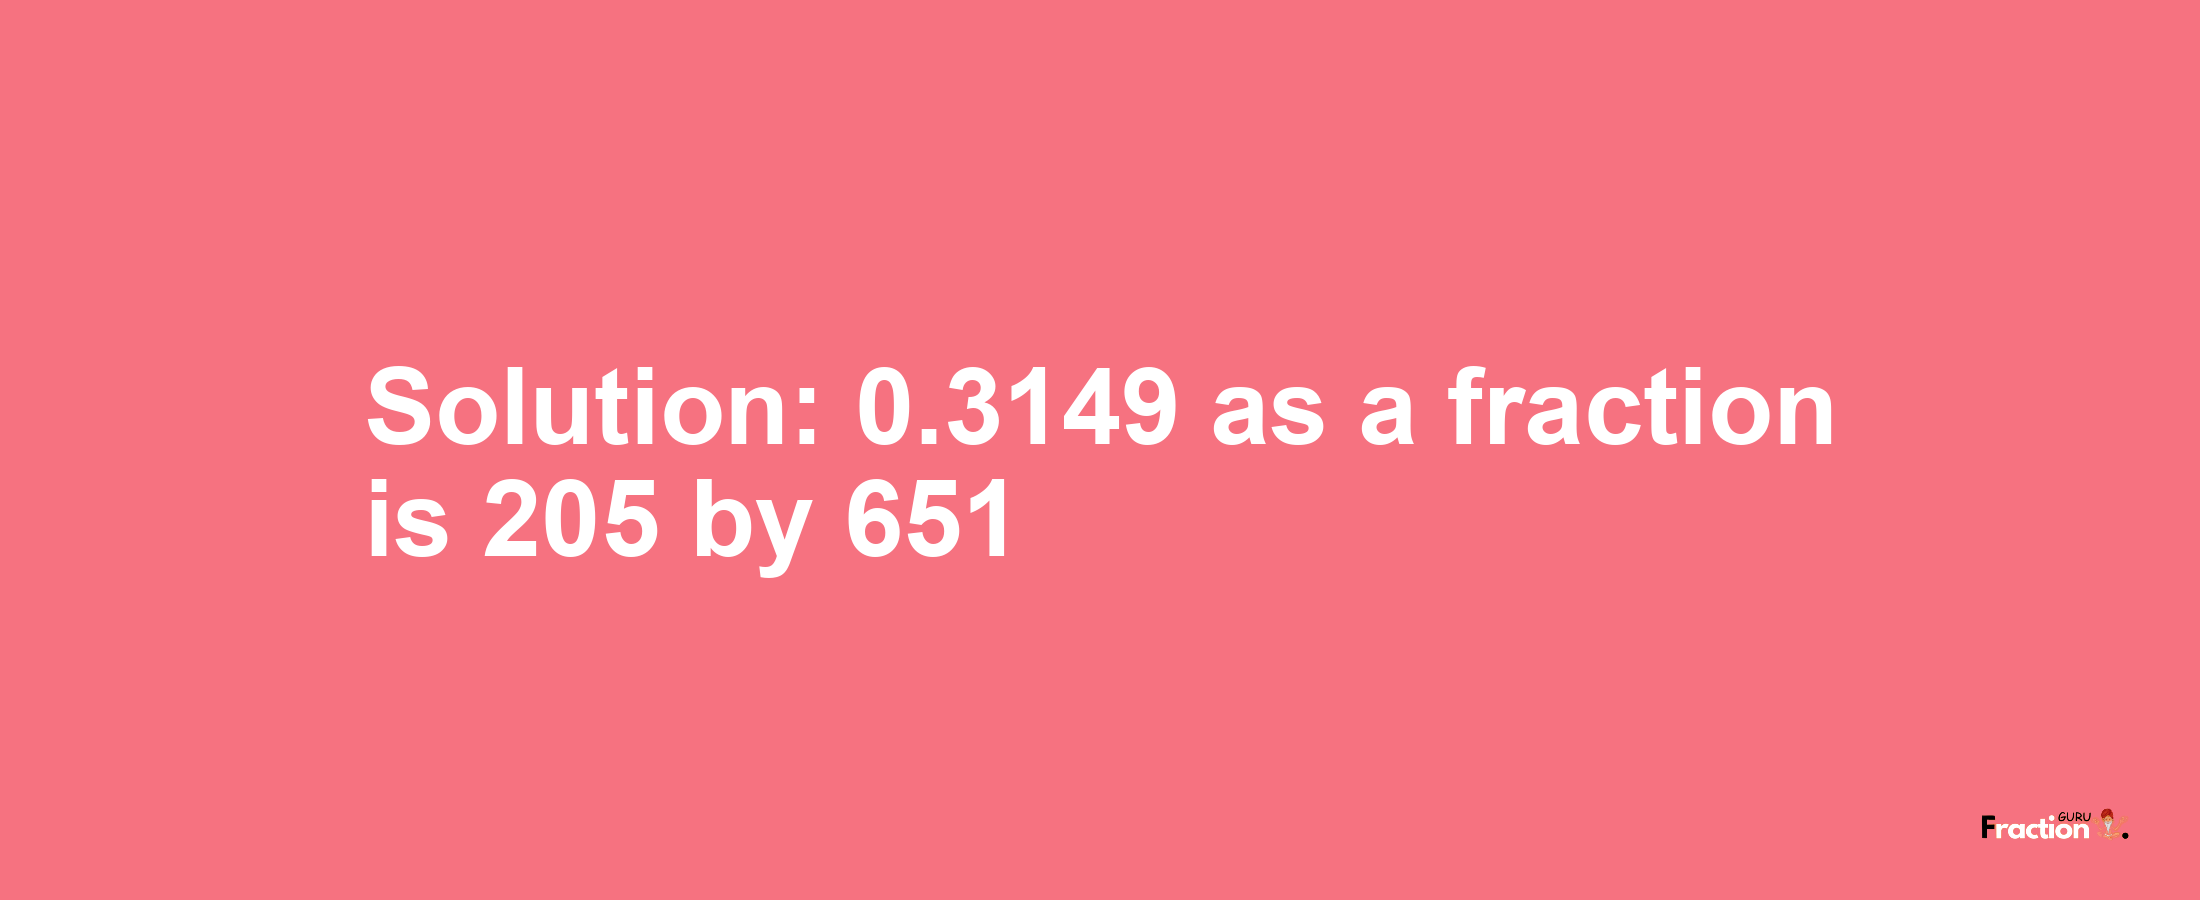 Solution:0.3149 as a fraction is 205/651